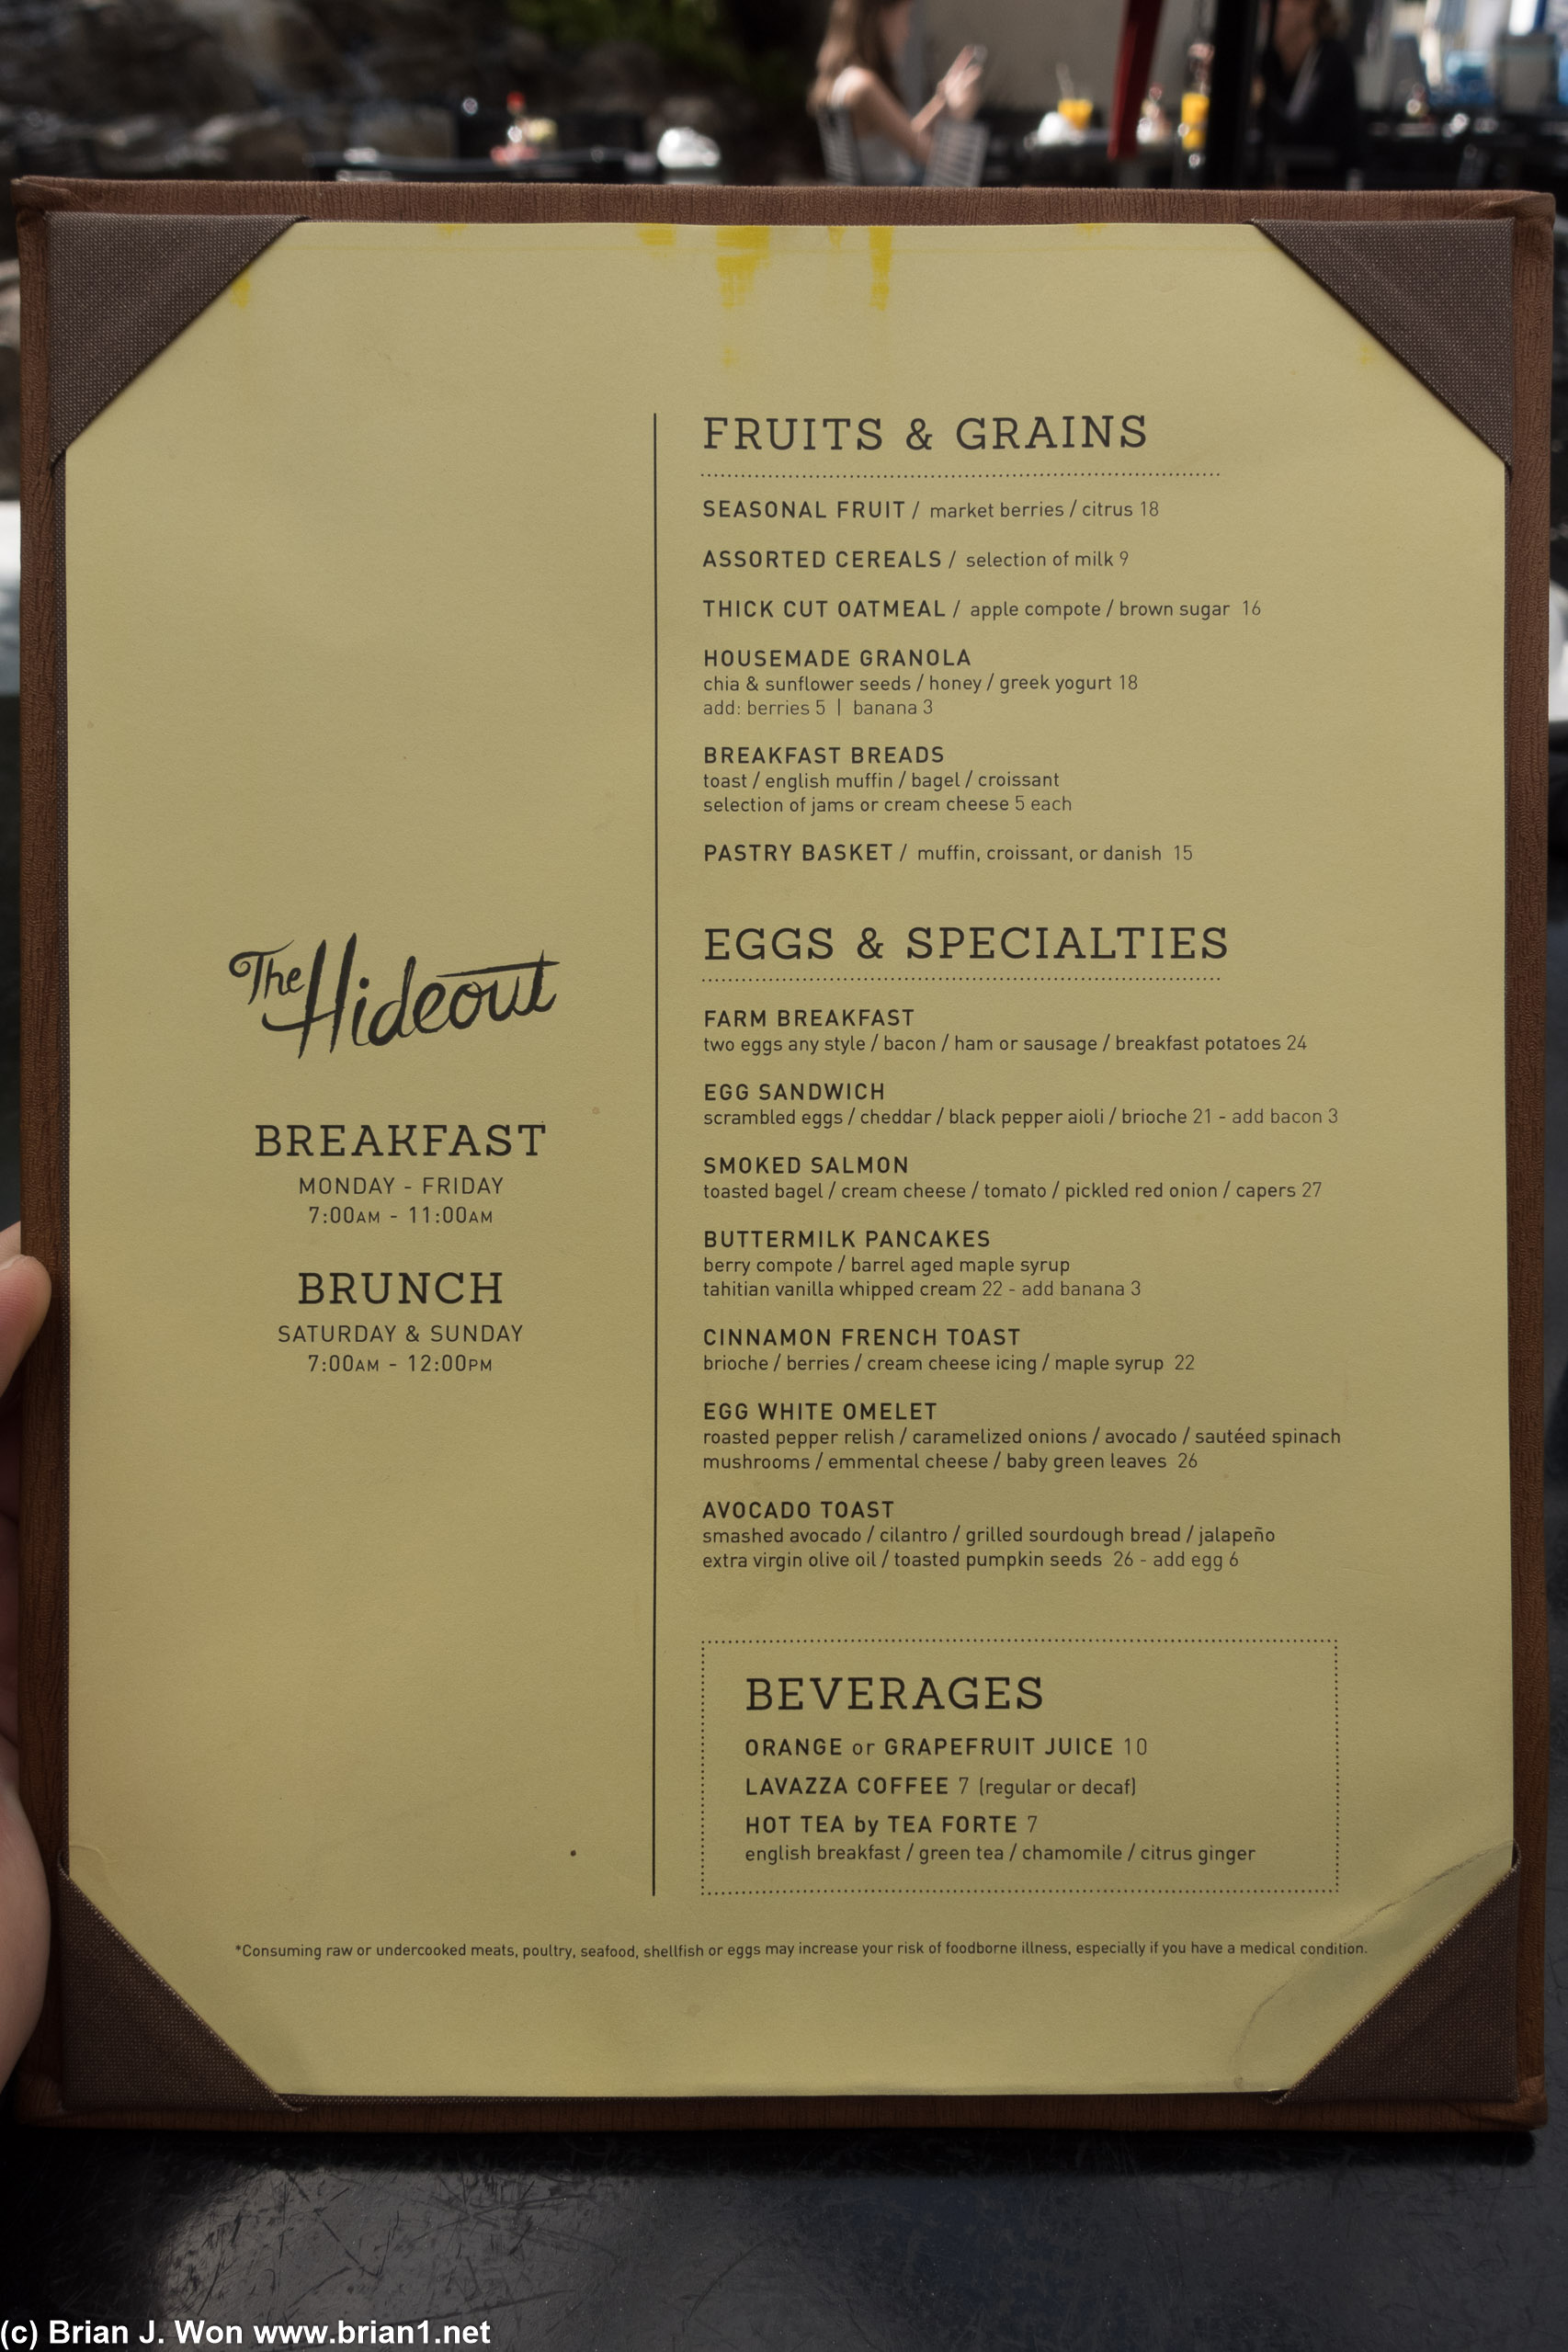 $25 food and beverage credit at The Hideout doesn't buy much.